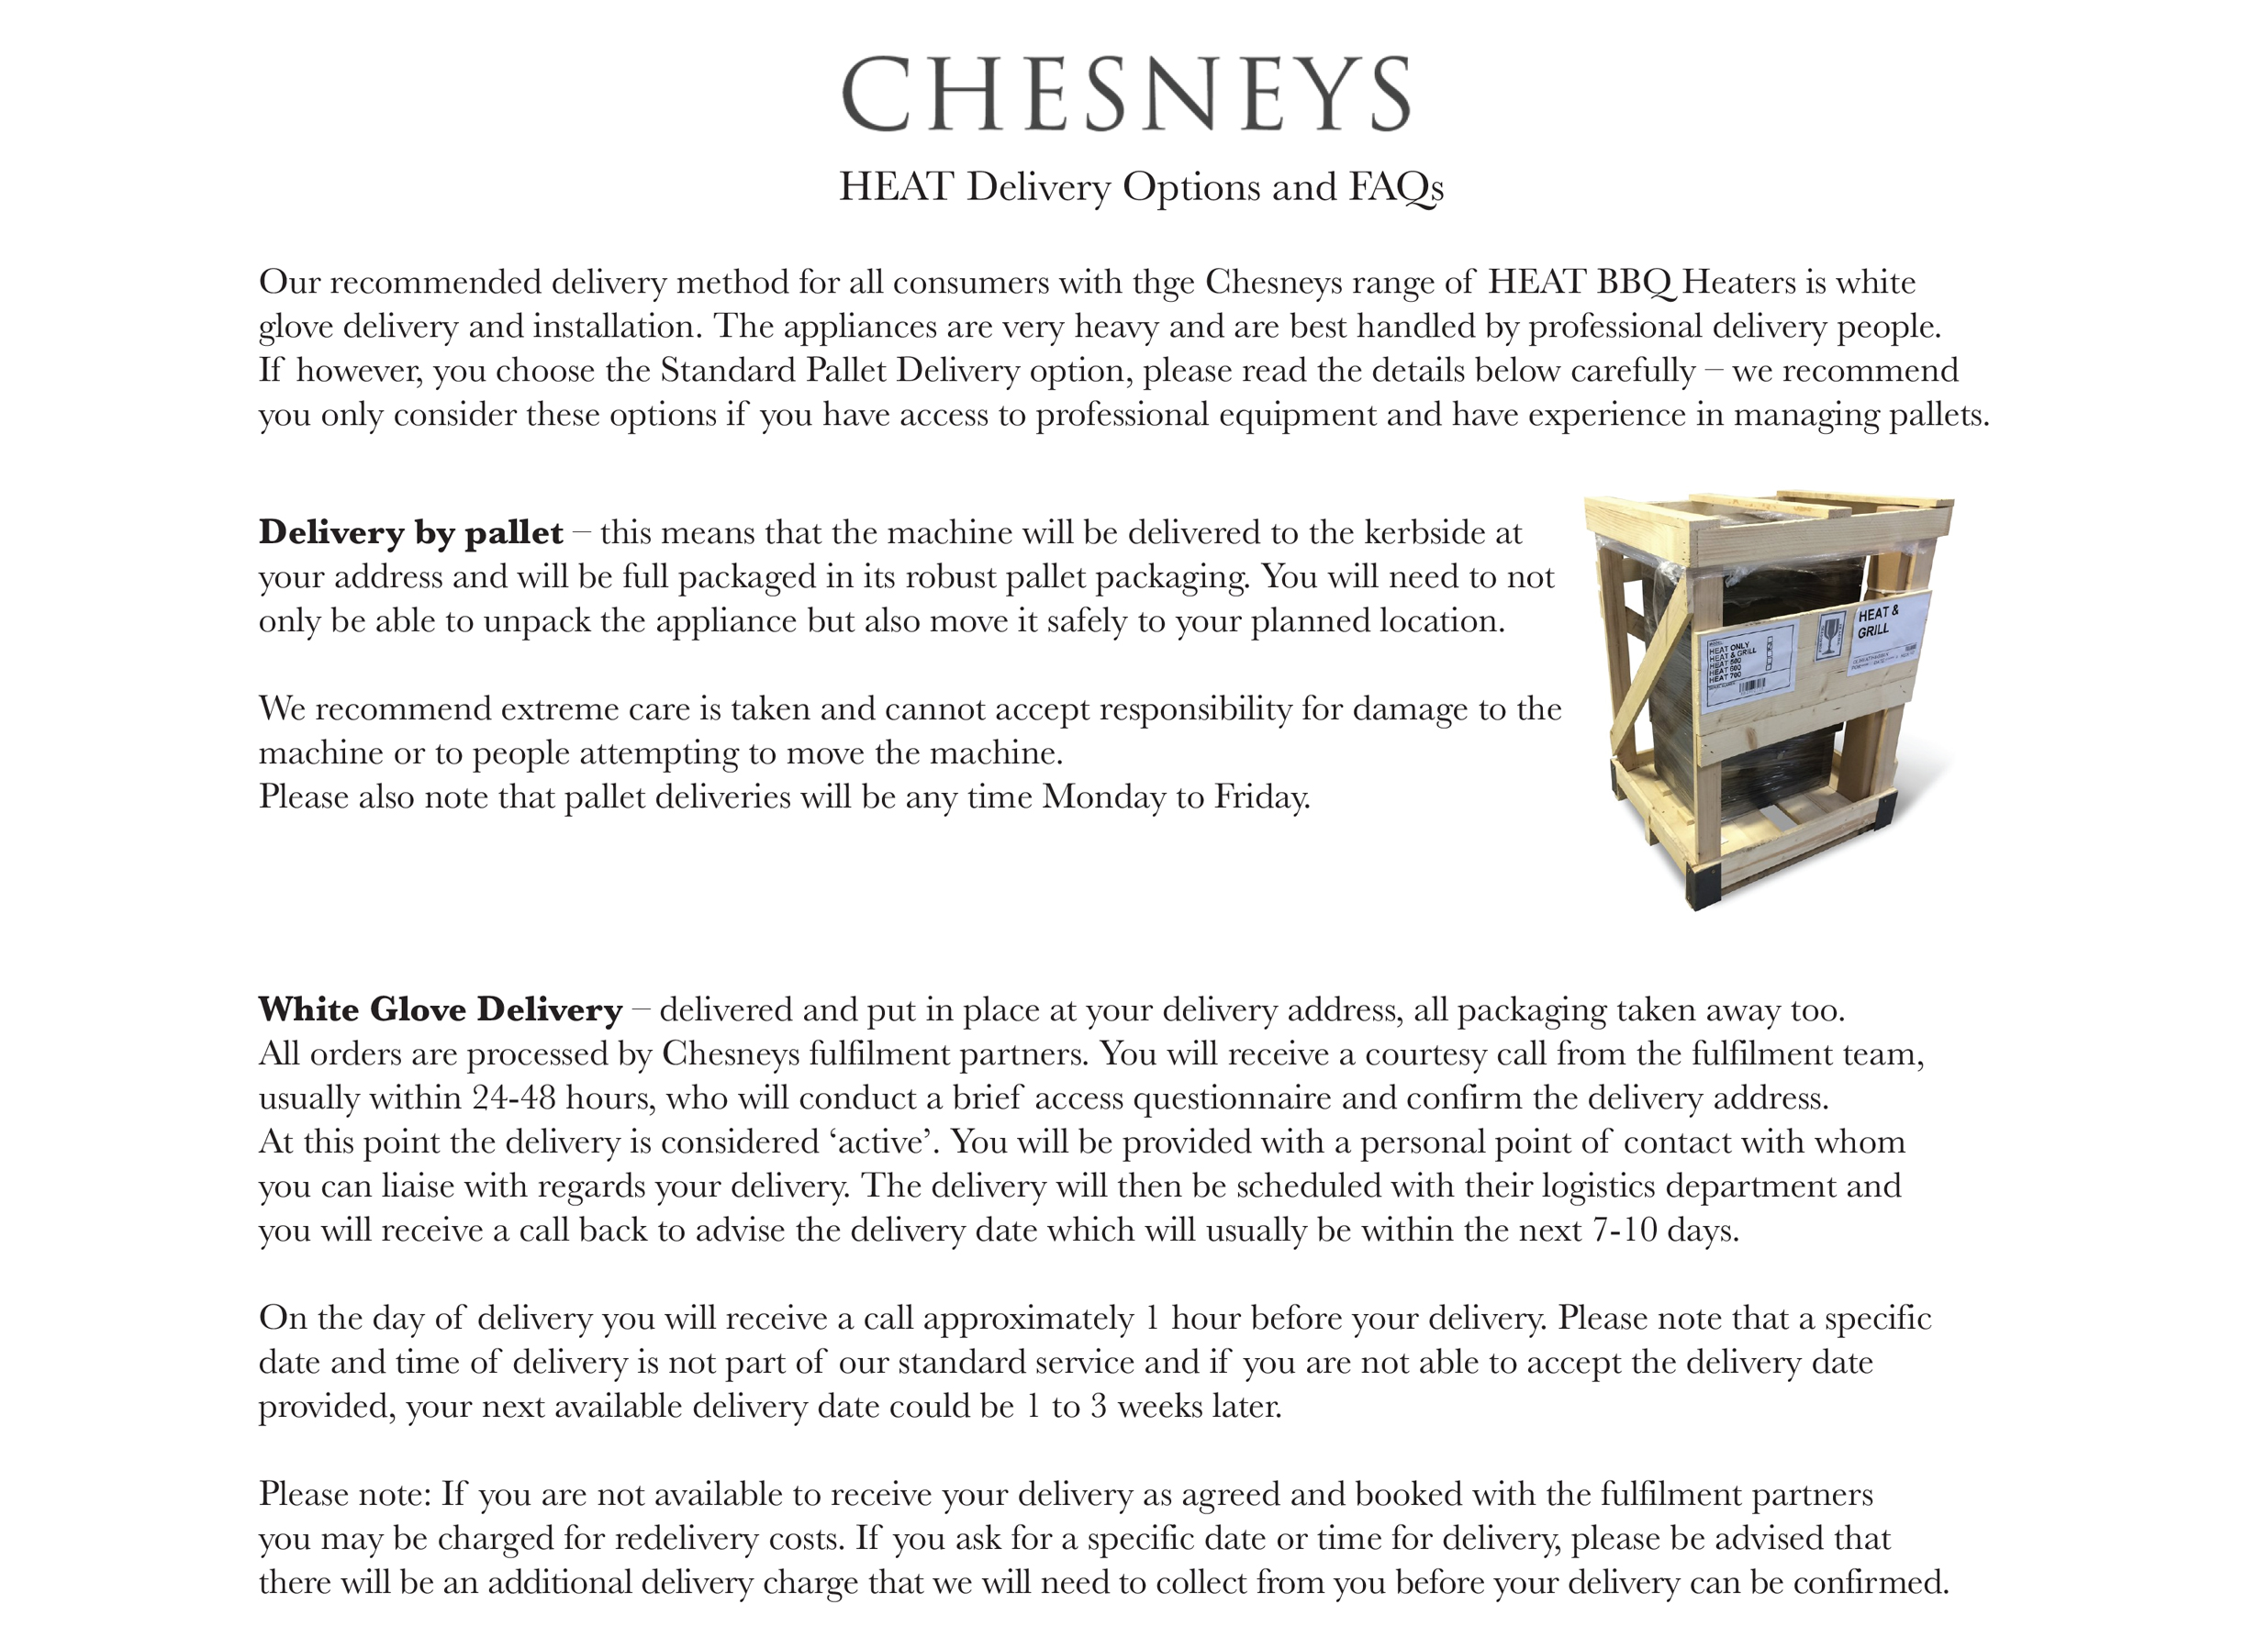 Chesneys HEAT BBQ Heater Delivery Information